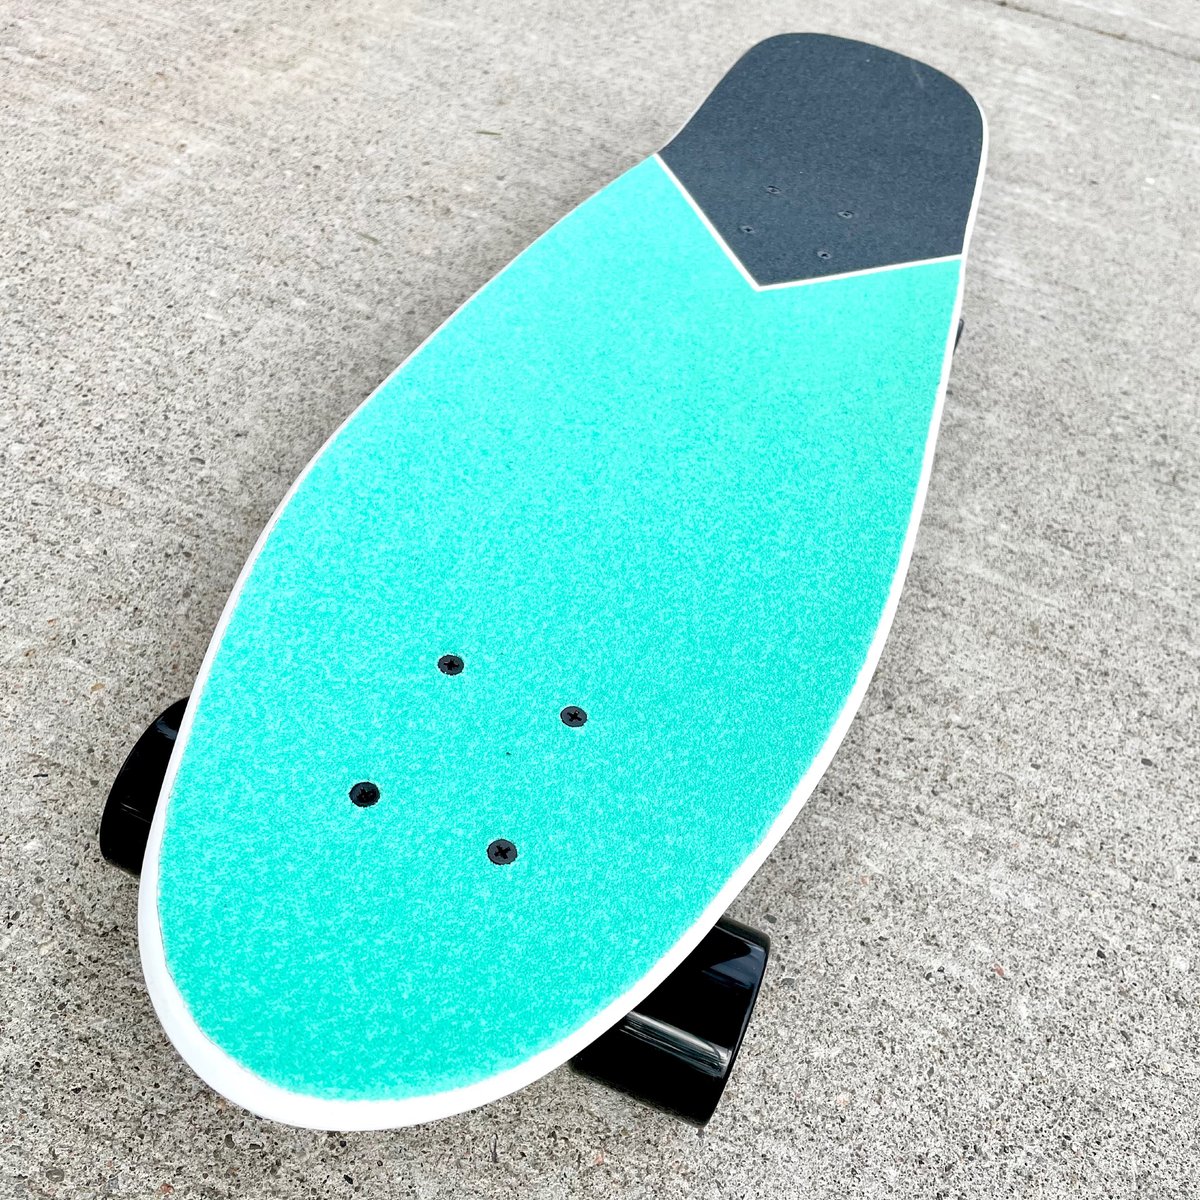 Image of White & Turquoise 8” Complete Cruiser